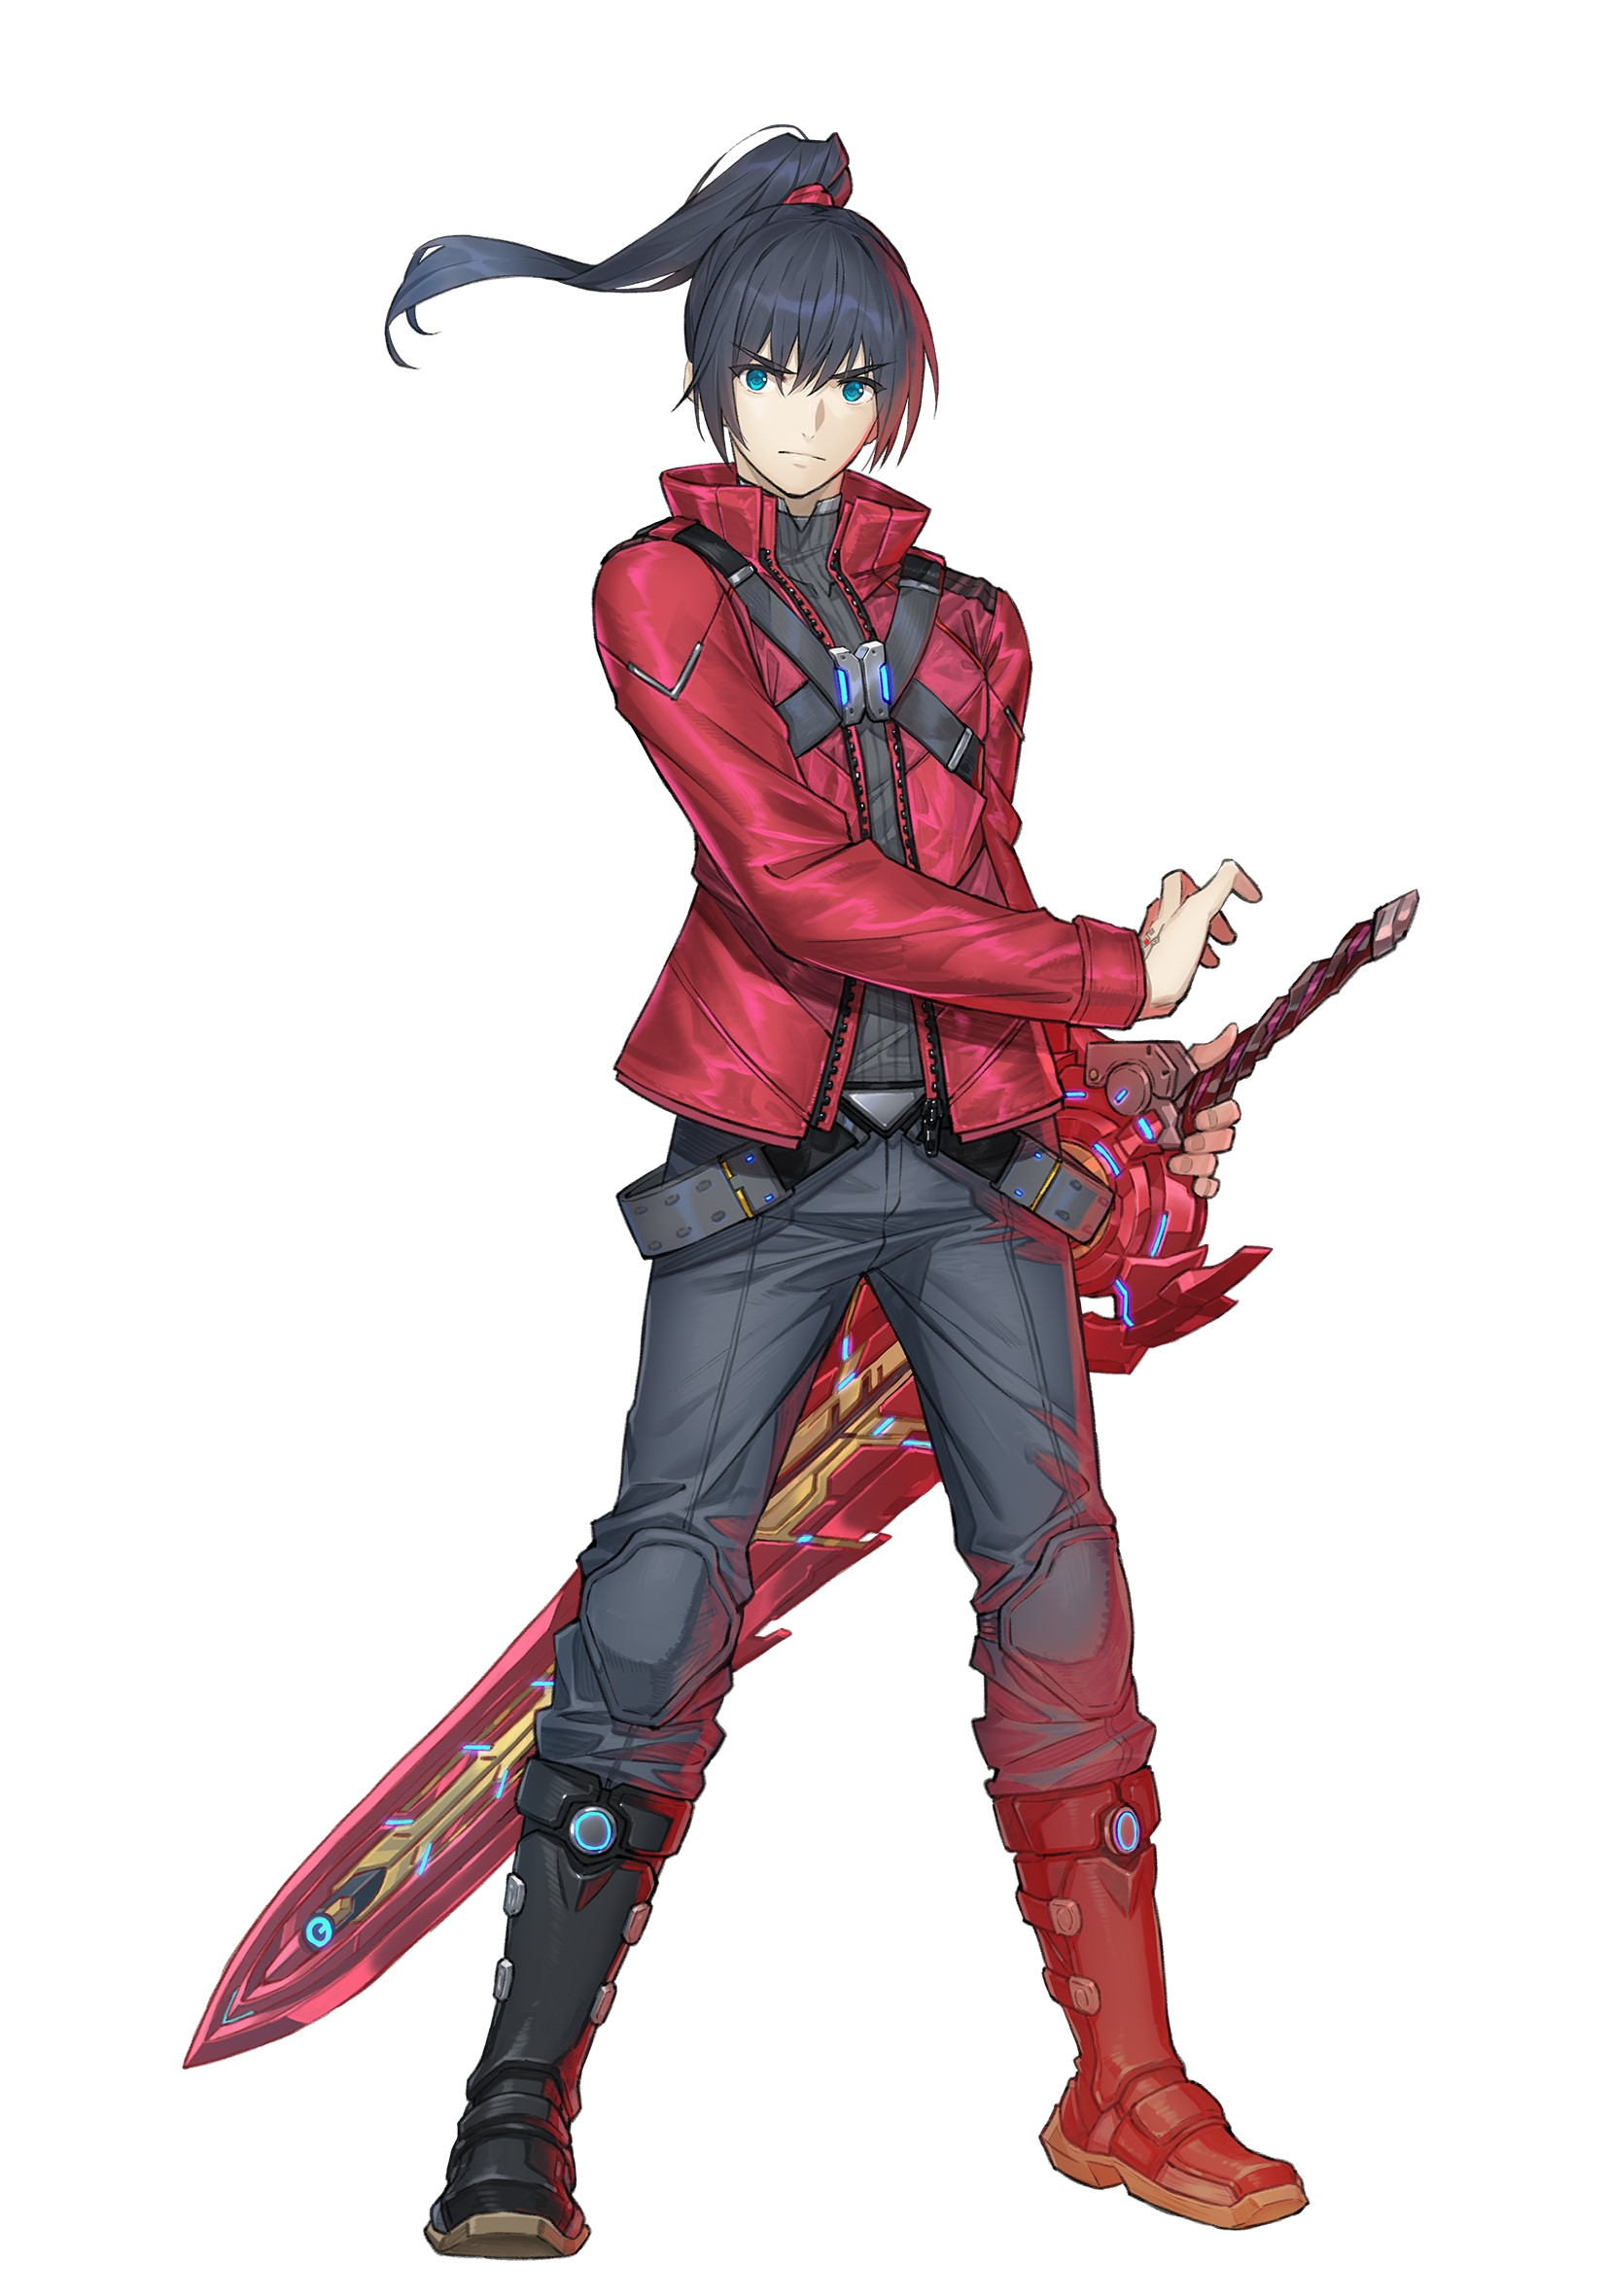 PNG of Noah from Xenoblade Chronicles 3